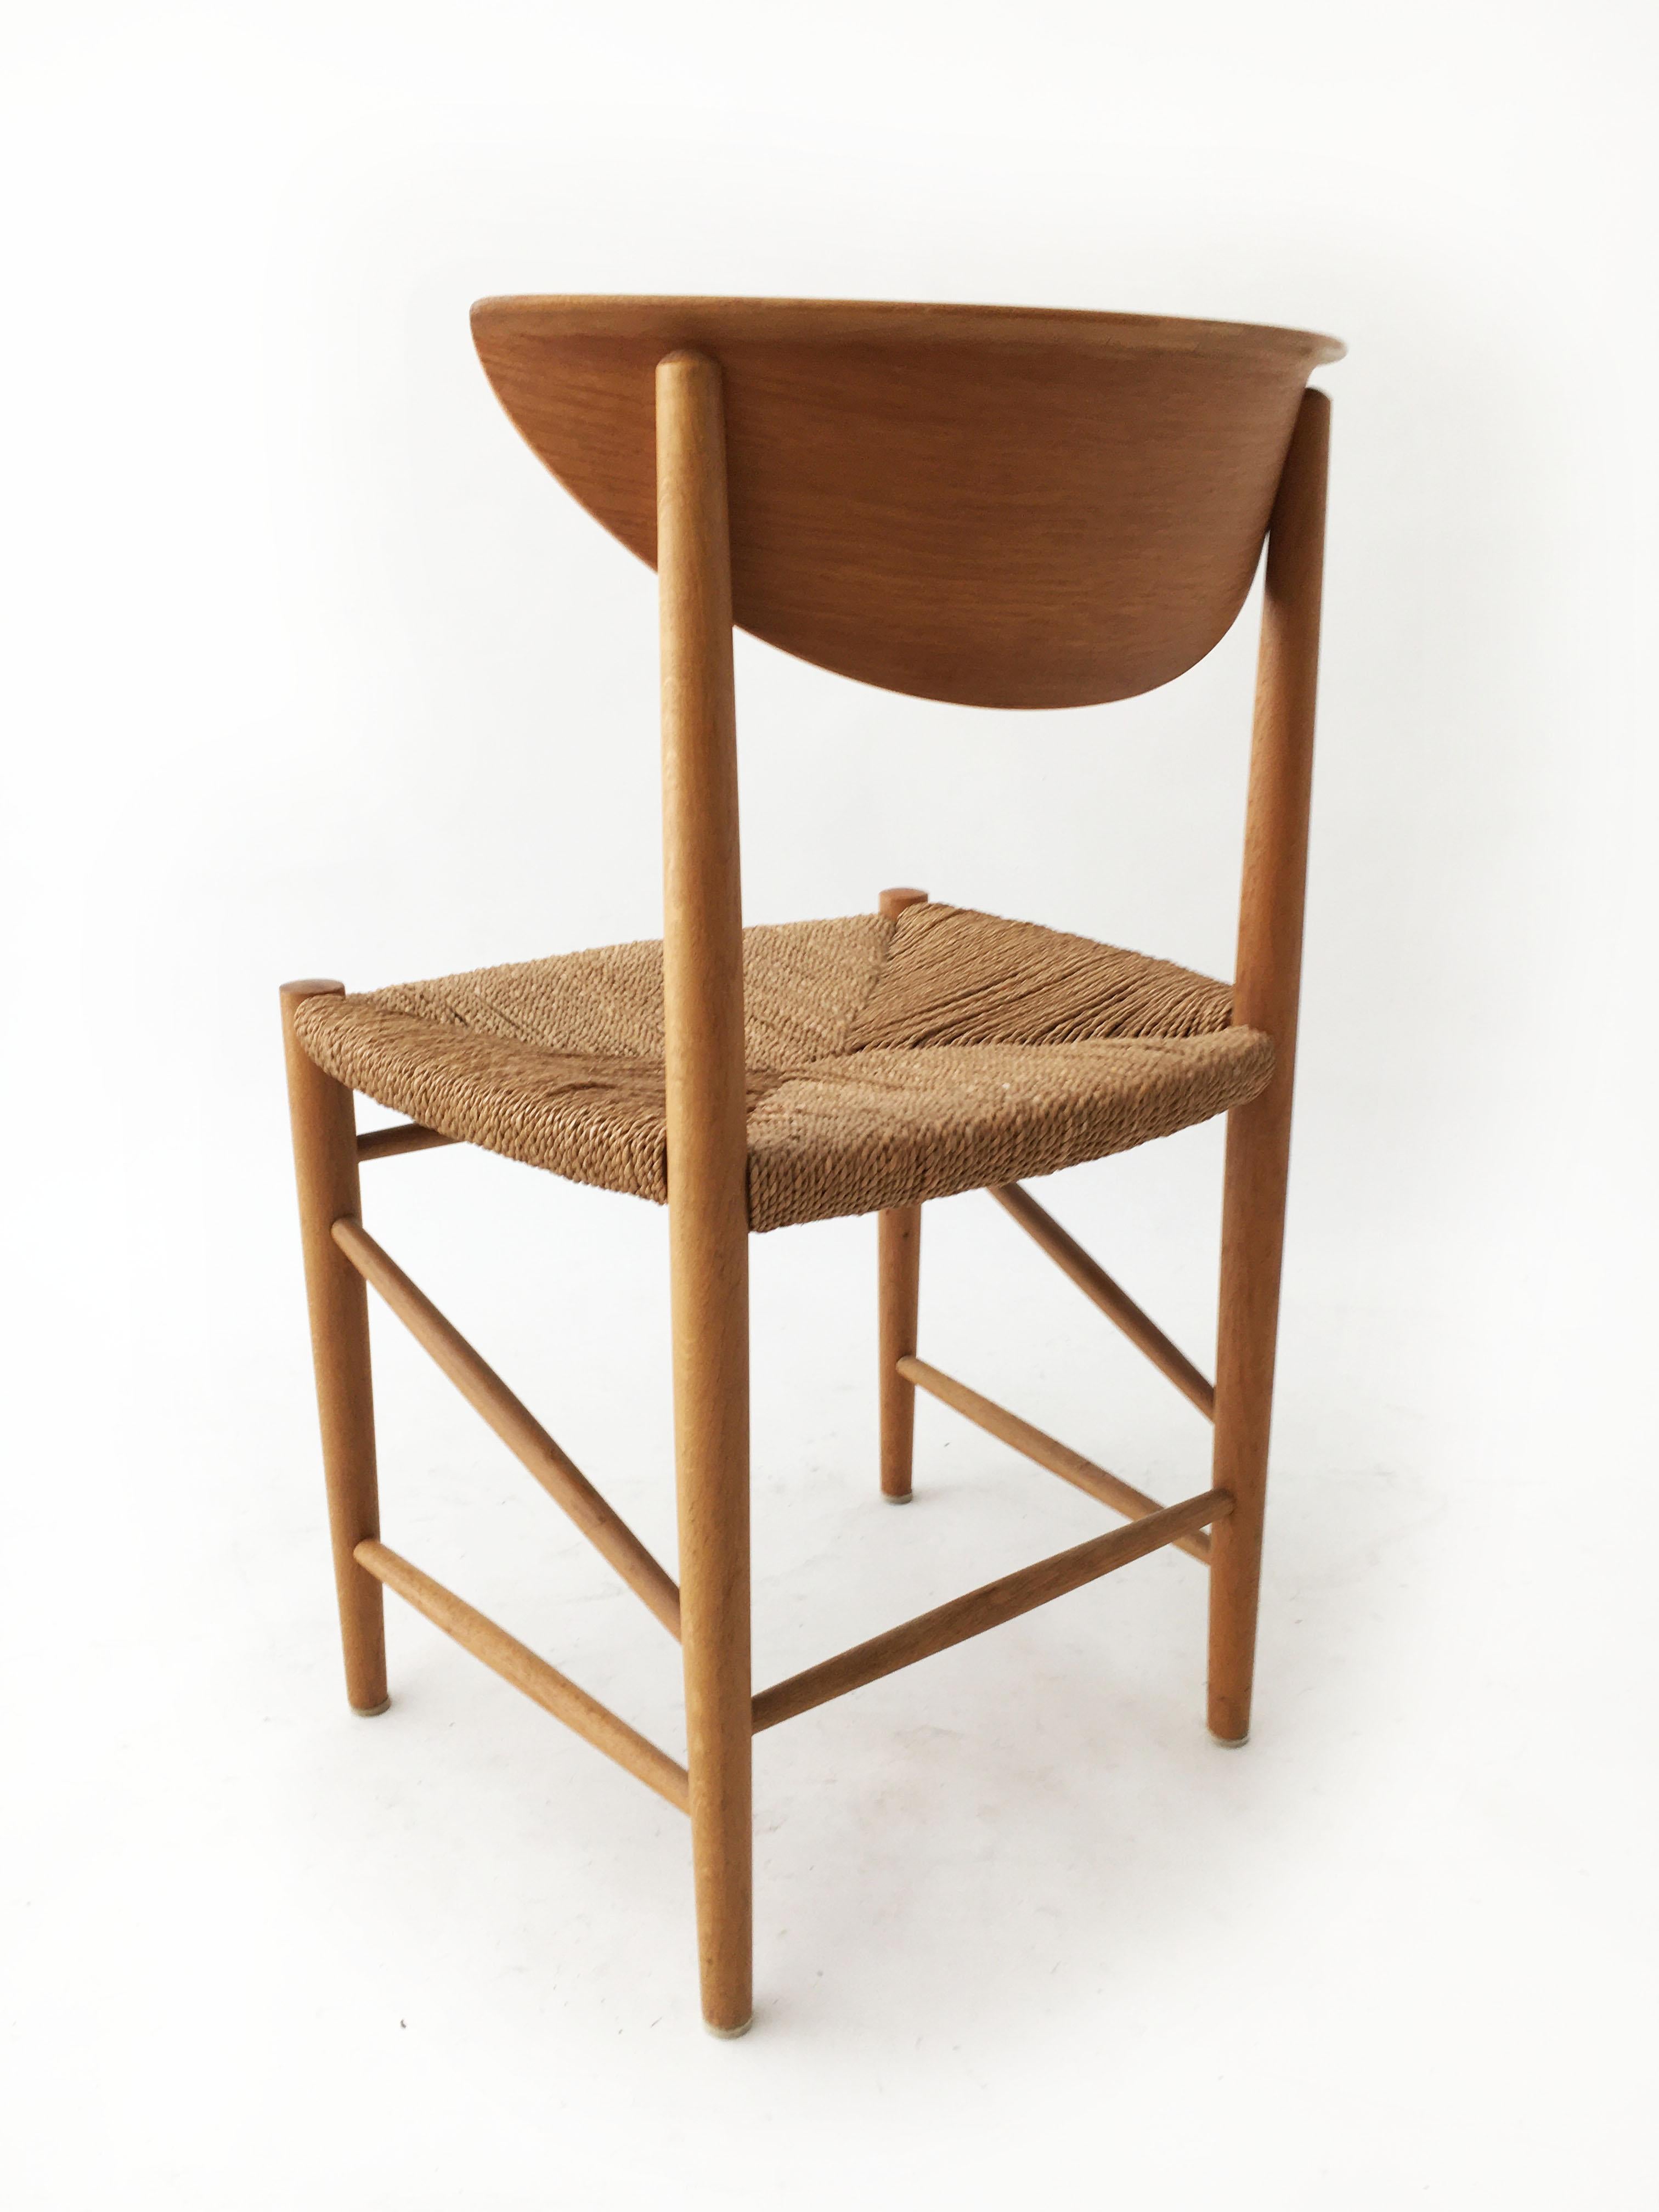 Danish Hvidt and Molgaard-Nielsen Set of Four Oak and Cord Chairs, Denmark, 1950s